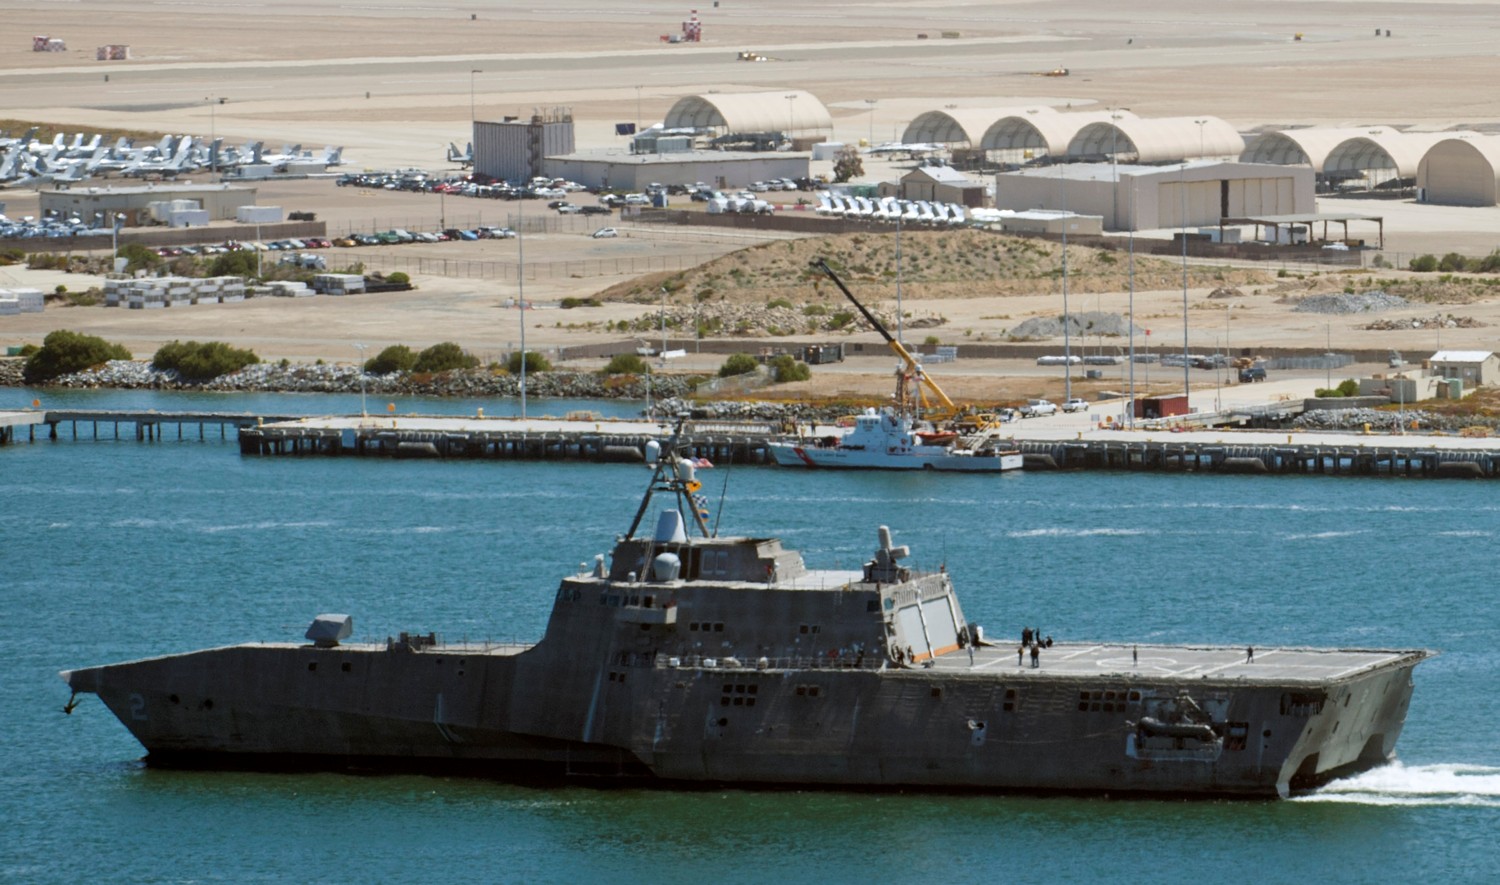 lcs-2 uss independence littoral combat ship us navy class 15a san diego